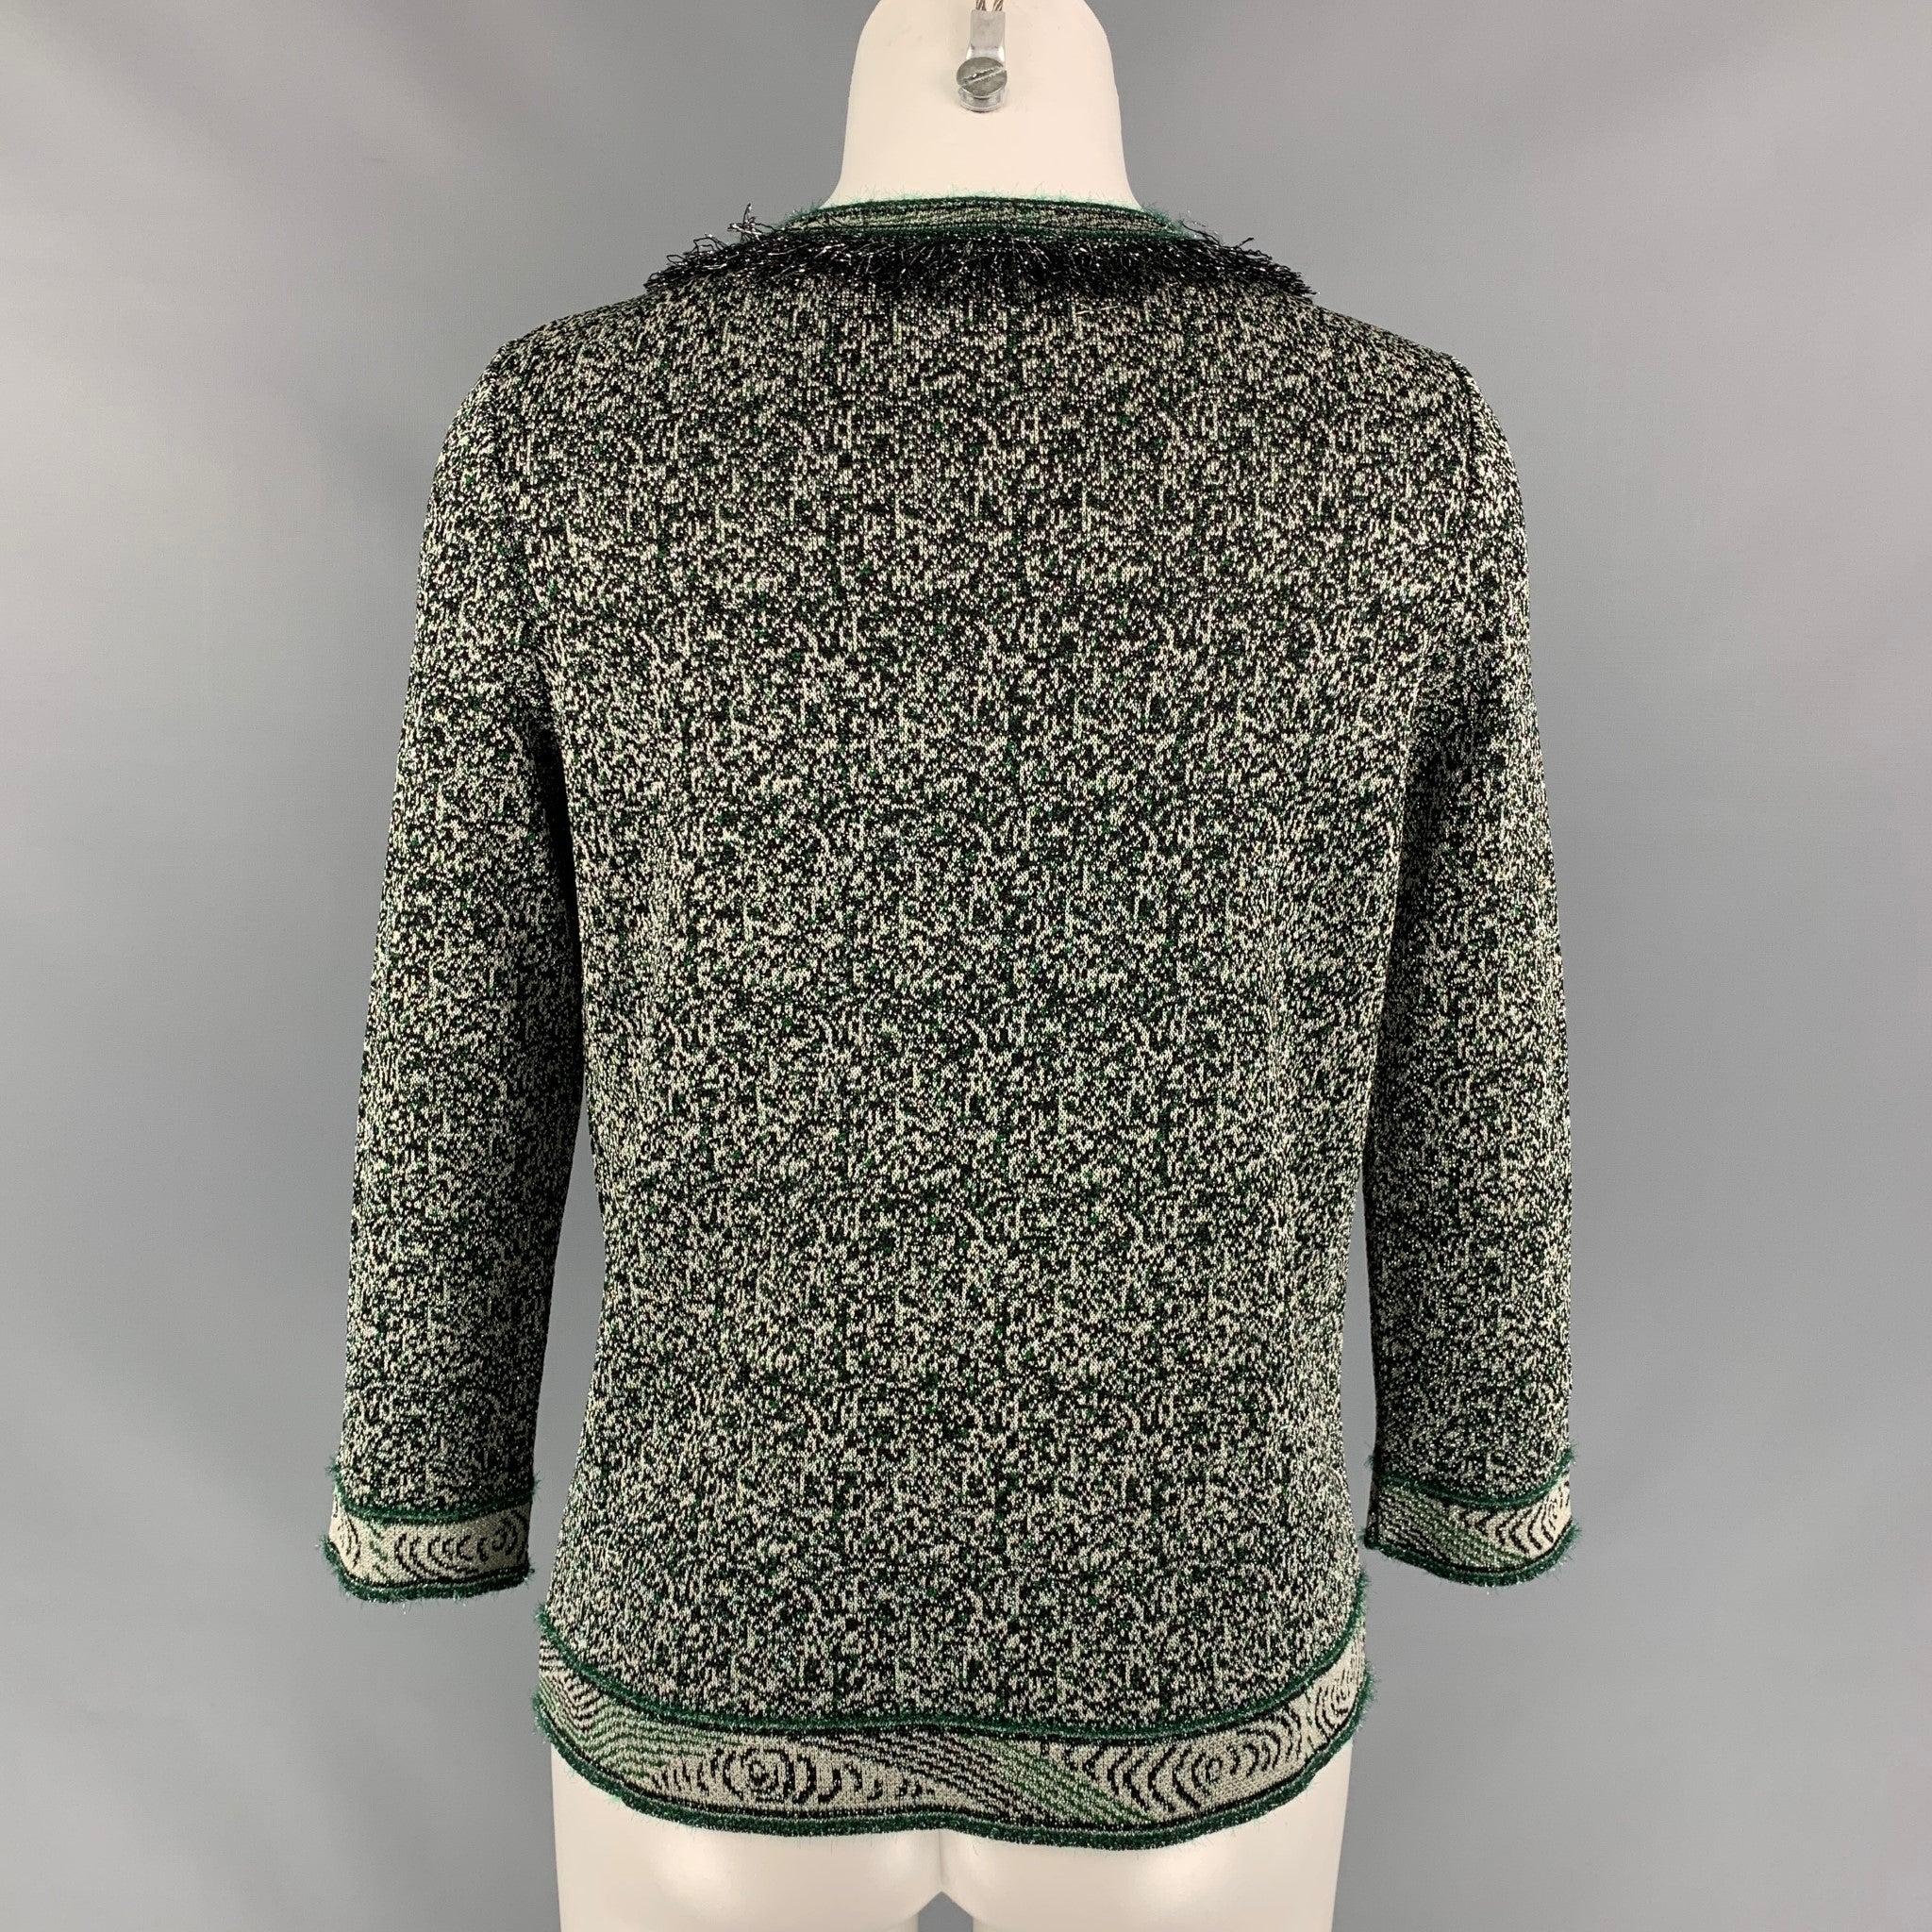 Women's M MISSONI Size 2 Green & Silver Knitted Acetate Blend Cardigan